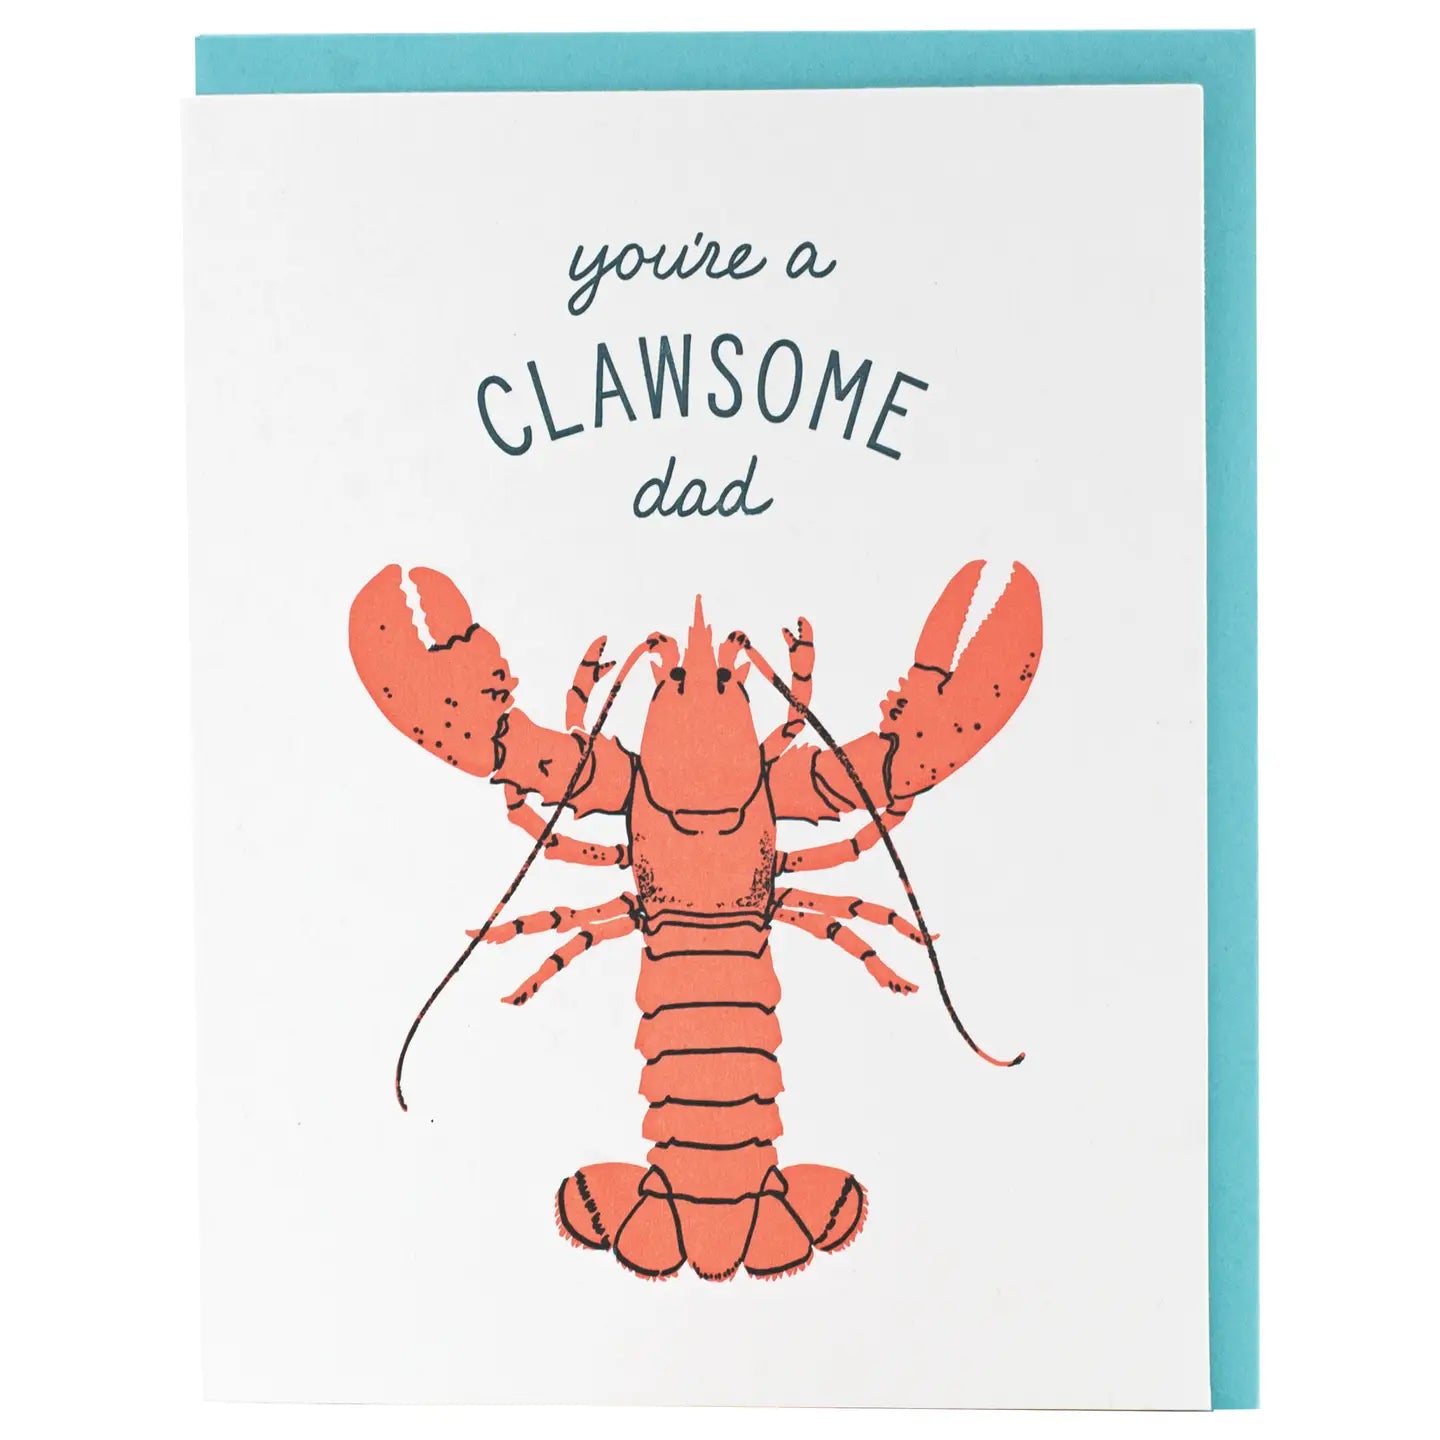 Smudge Ink Greeting Card - Clawsome Lobster Dad